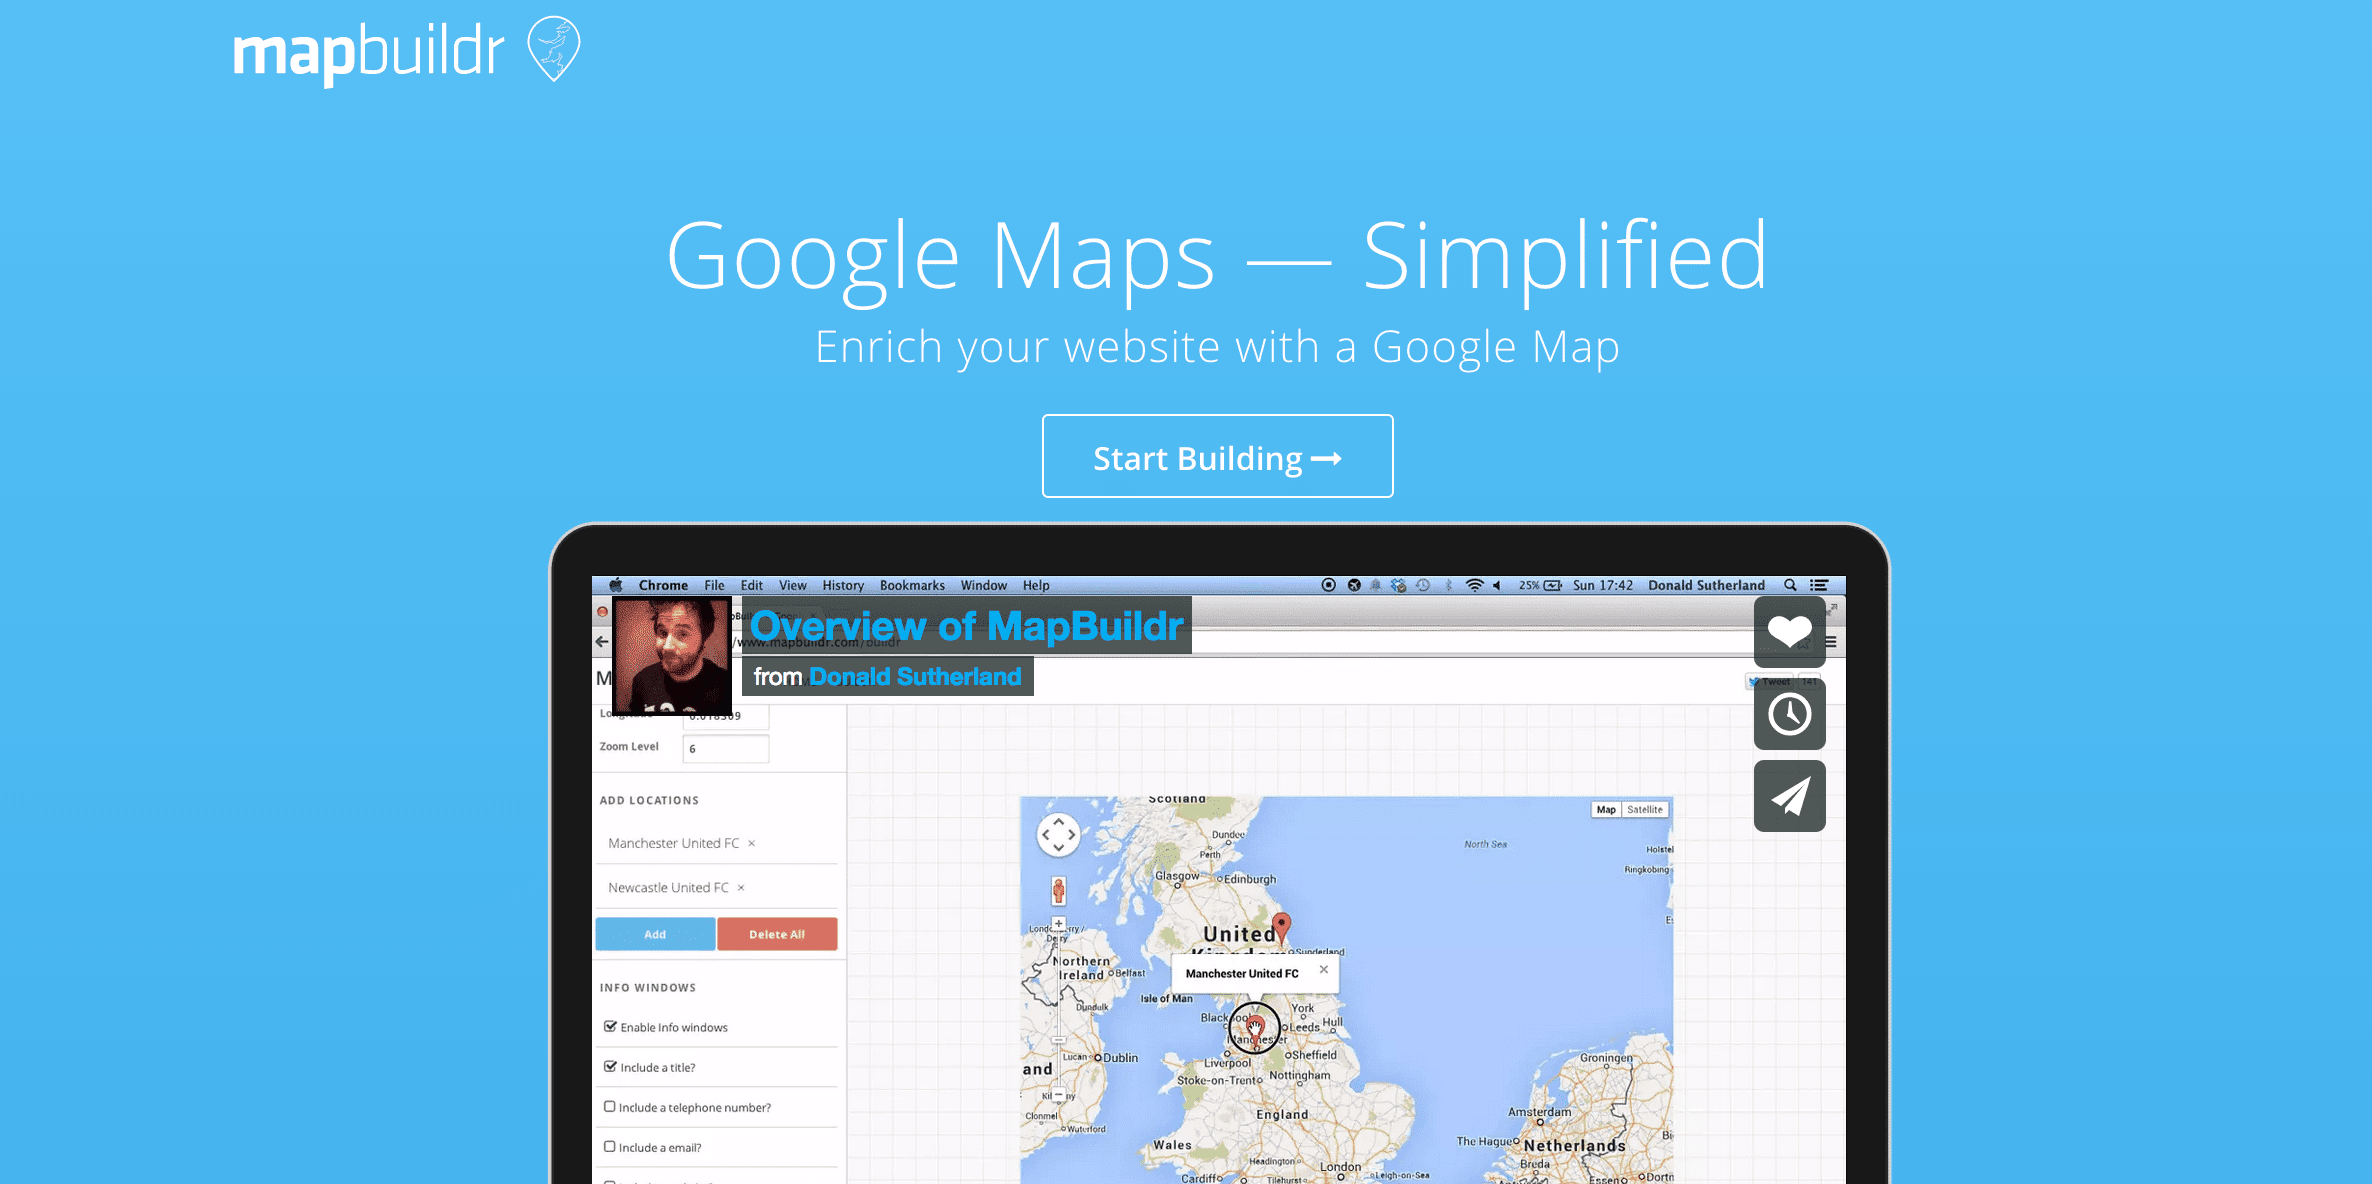 Mapbuildr lets you create your own Google map.